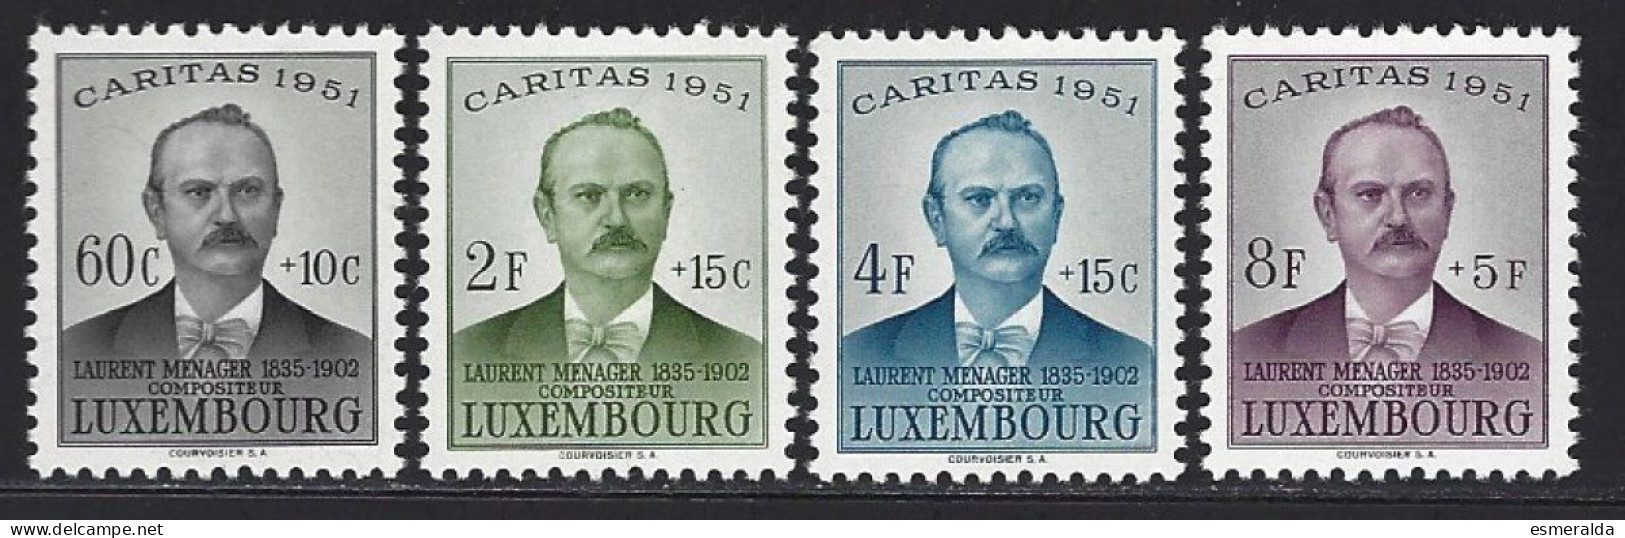 Luxembourg Yv 449/52, Caritas 1951,Laurent Ménager,compositeur.  **/mnh - Unused Stamps